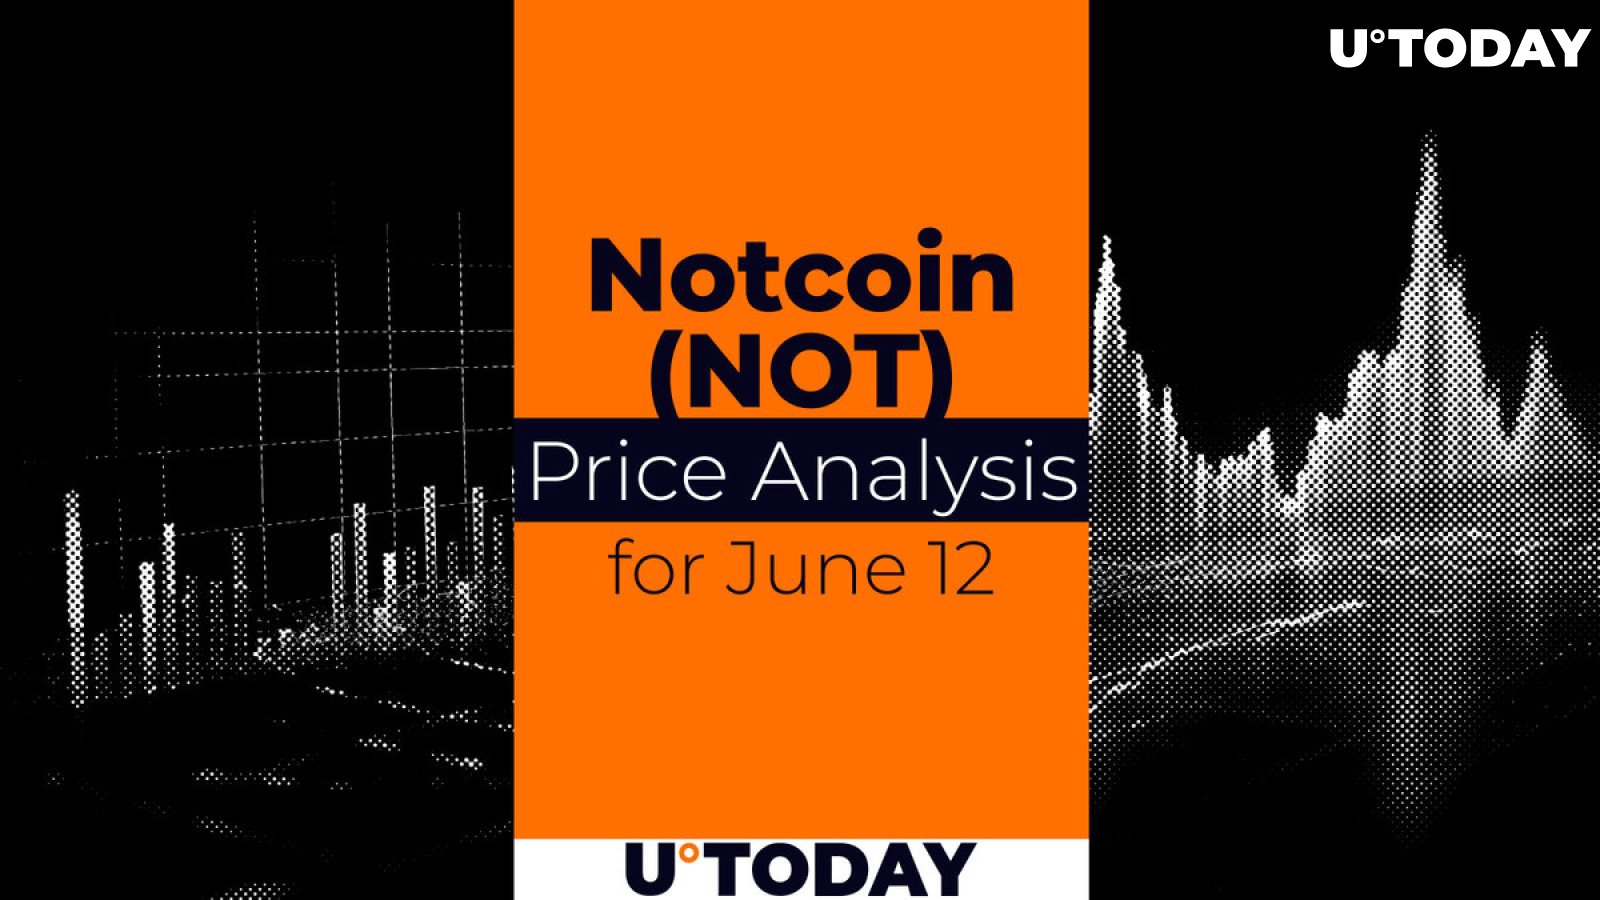 Notcoin (NOT) Price Prediction for June 12